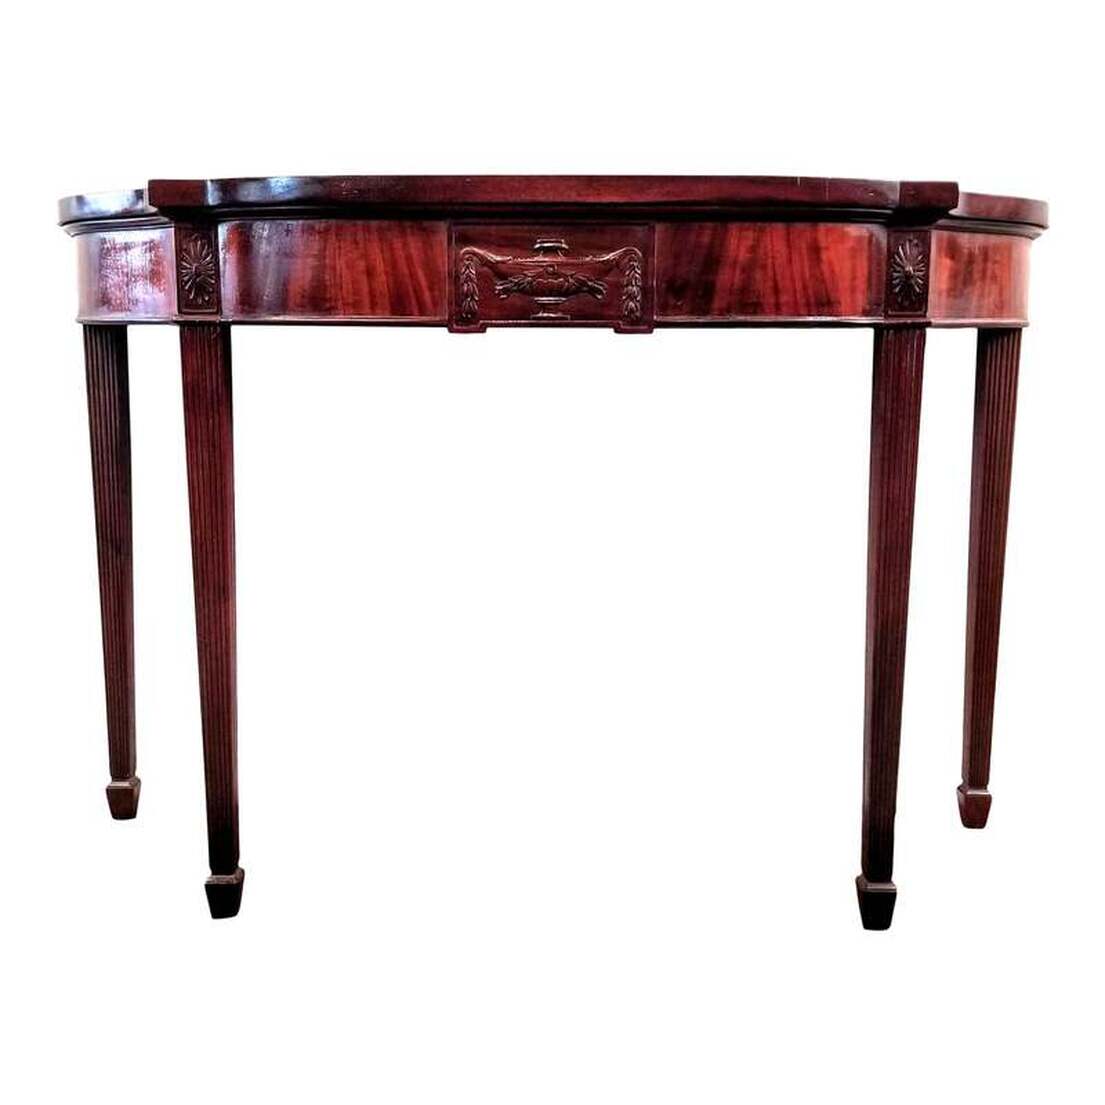 Vintage 1920s-1940s American made mahogany console table may be used also as a pier table, writing desk, serving table, entry hall table, and butler's table.  The style is in that of George III, with a shaped top, reeded and tapered legs, and a Neoclassical urn motif at front.  Table will complement rooms containing style elements of Adam, Georgian, Sheraton, Federal, Hepplewhite, and Phyfe.  Size :  48